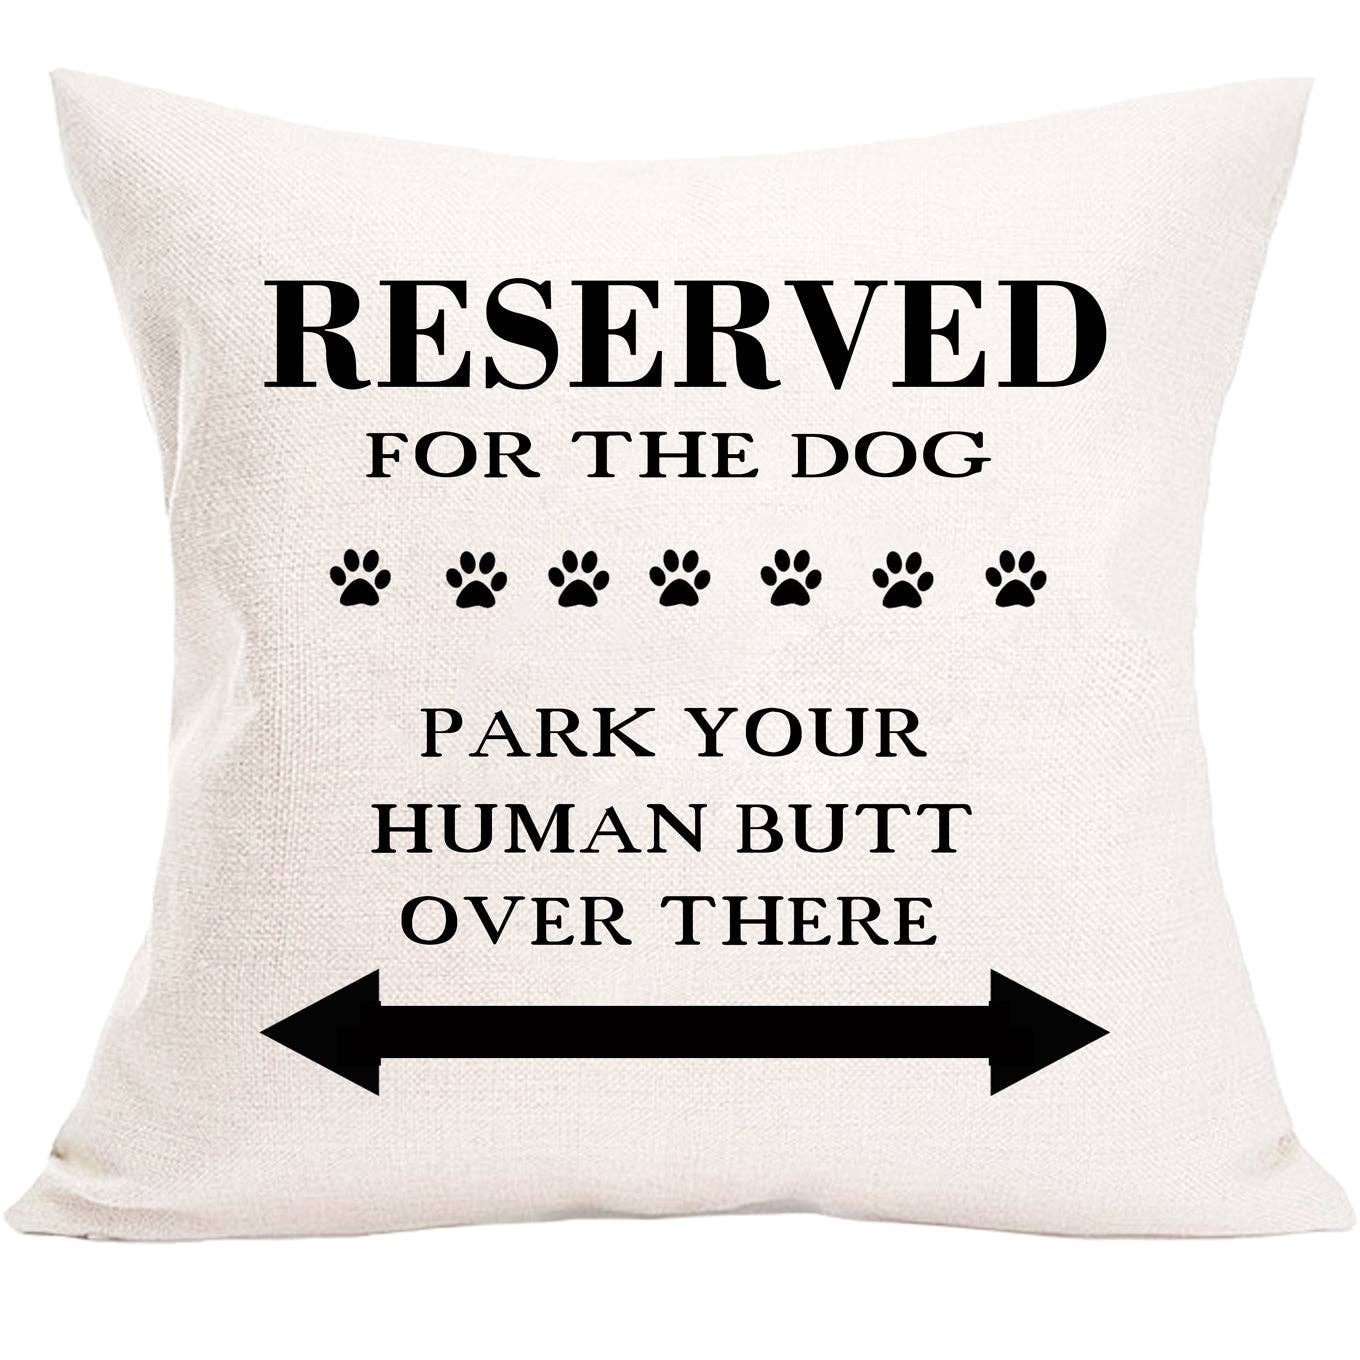 inVintage - Reserved For Dog Throw Pillow